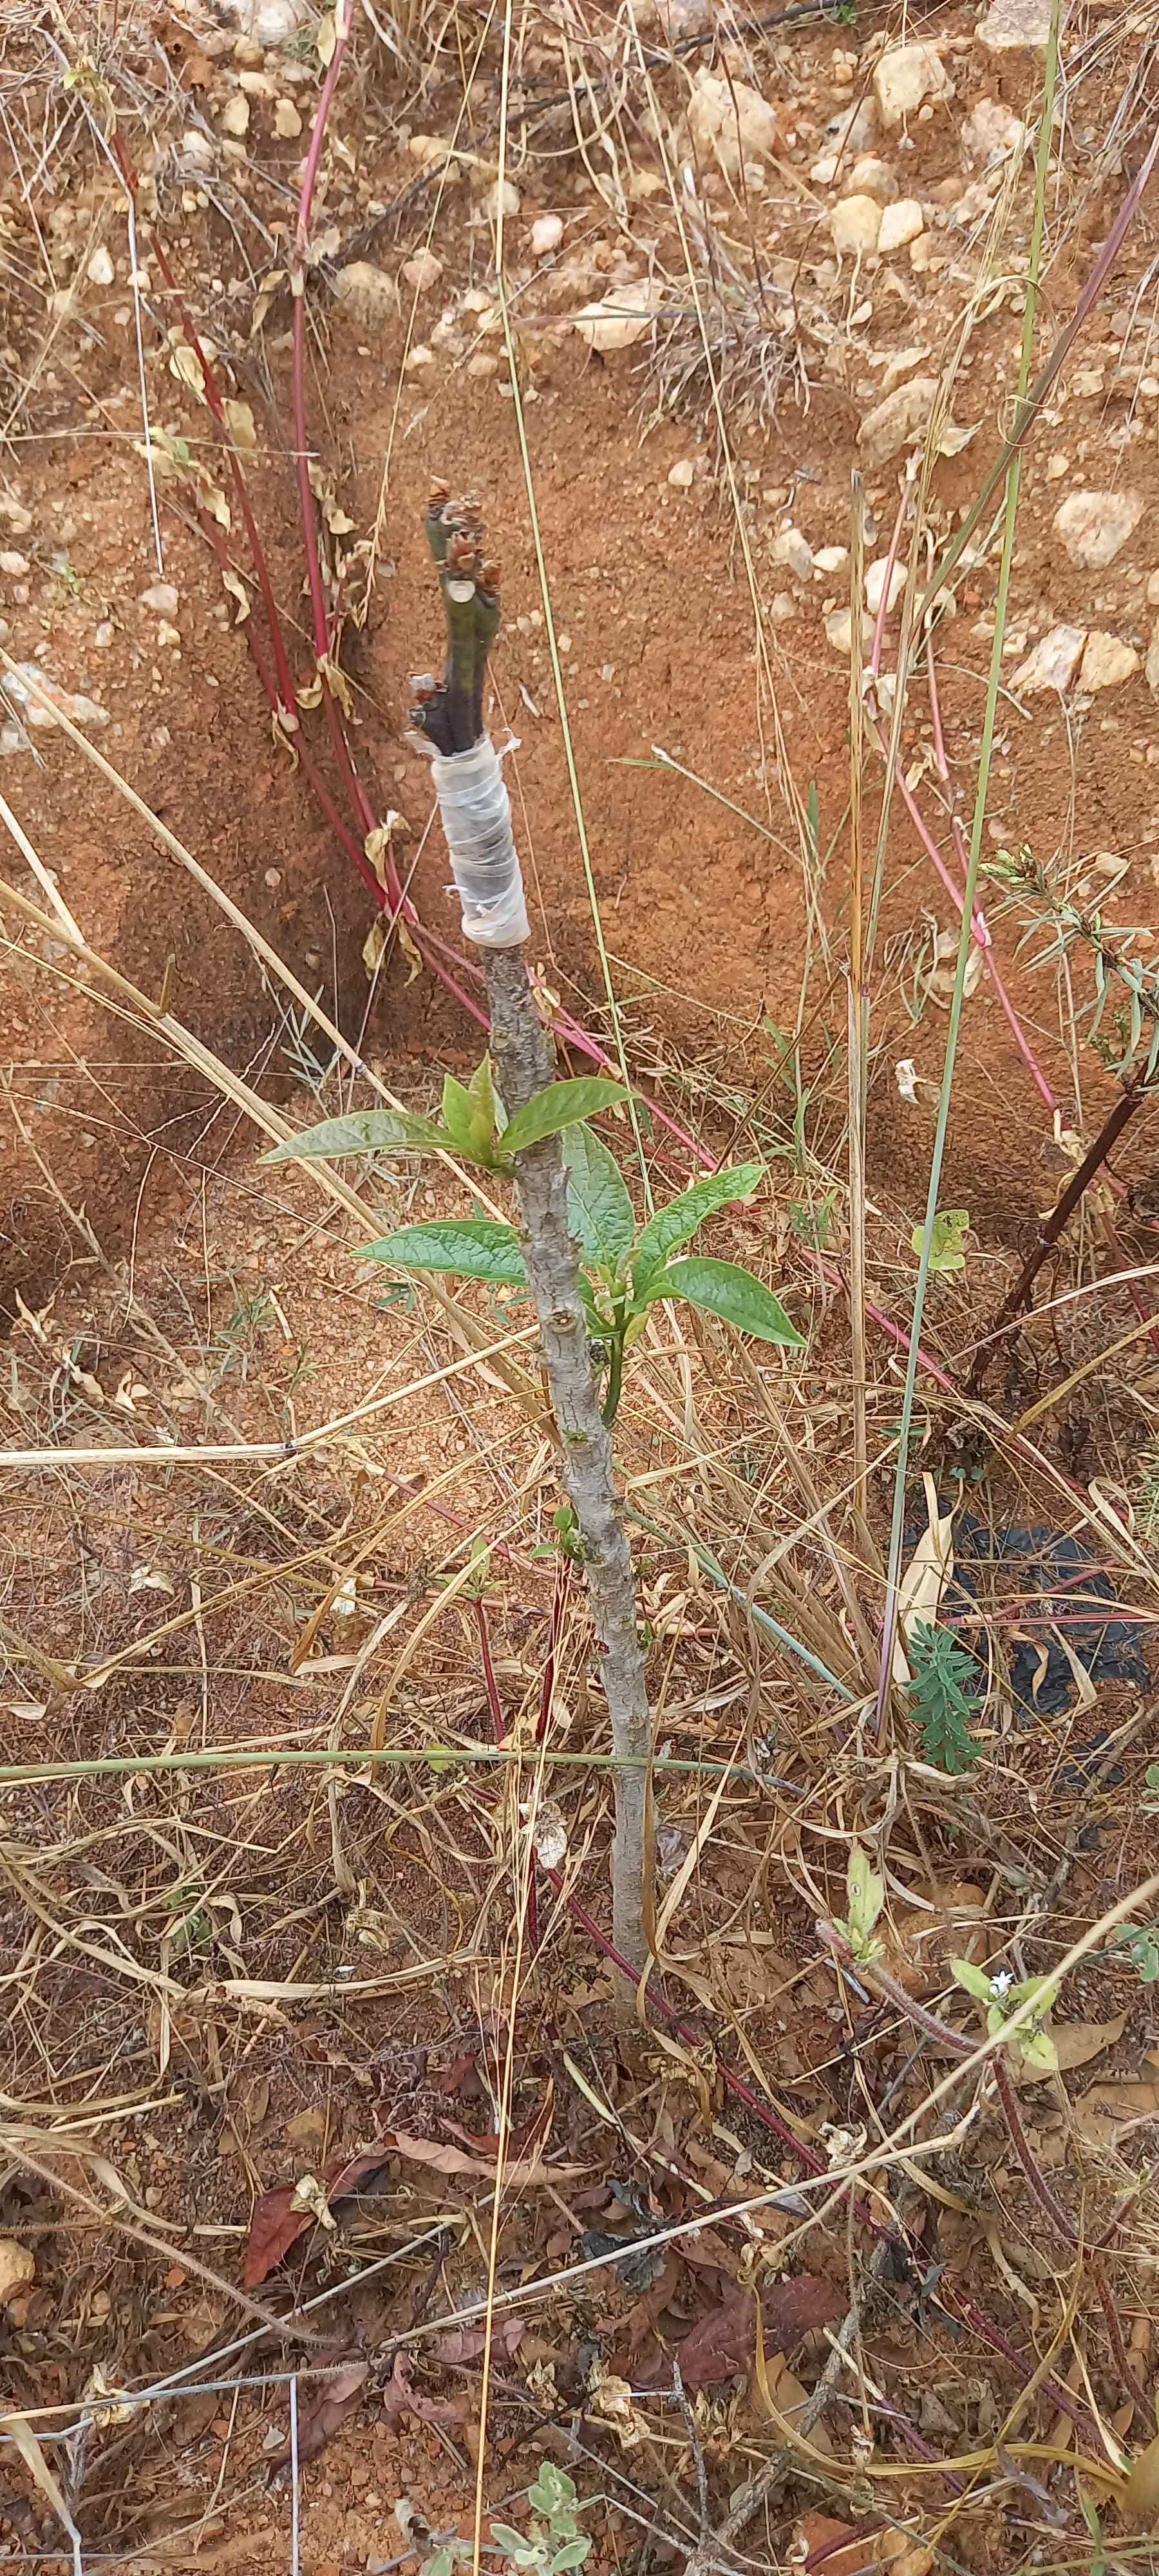 A farmer’s regrafted seedling to salvage dried-out seedling